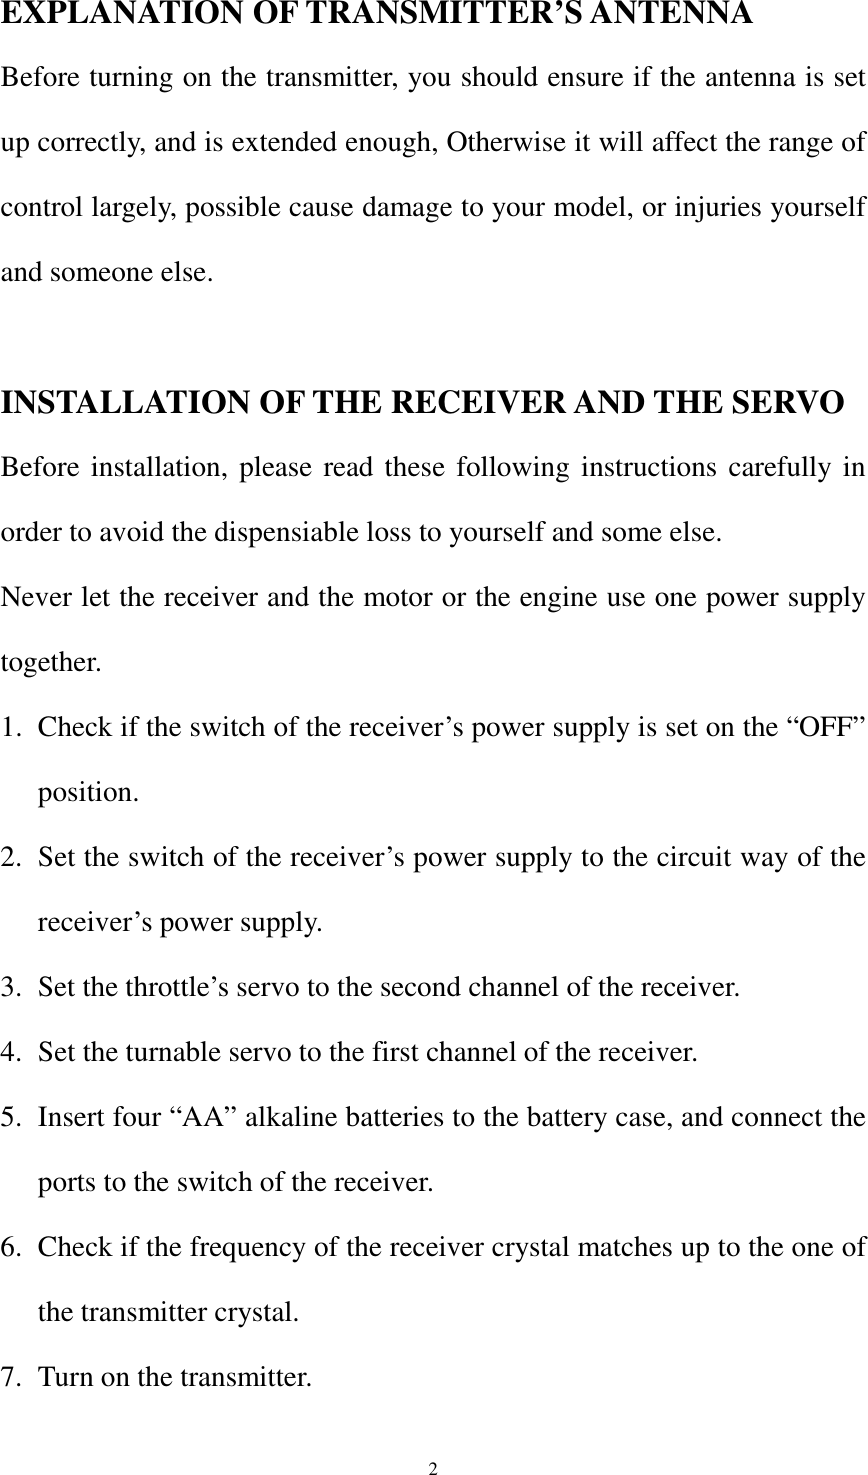  2EXPLANATION OF TRANSMITTER’S ANTENNA Before turning on the transmitter, you should ensure if the antenna is set up correctly, and is extended enough, Otherwise it will affect the range of control largely, possible cause damage to your model, or injuries yourself and someone else.  INSTALLATION OF THE RECEIVER AND THE SERVO Before installation, please read these following instructions carefully in order to avoid the dispensiable loss to yourself and some else. Never let the receiver and the motor or the engine use one power supply together. 1. Check if the switch of the receiver’s power supply is set on the “OFF” position. 2. Set the switch of the receiver’s power supply to the circuit way of the receiver’s power supply. 3. Set the throttle’s servo to the second channel of the receiver. 4. Set the turnable servo to the first channel of the receiver. 5. Insert four “AA” alkaline batteries to the battery case, and connect the ports to the switch of the receiver. 6. Check if the frequency of the receiver crystal matches up to the one of the transmitter crystal. 7. Turn on the transmitter. 